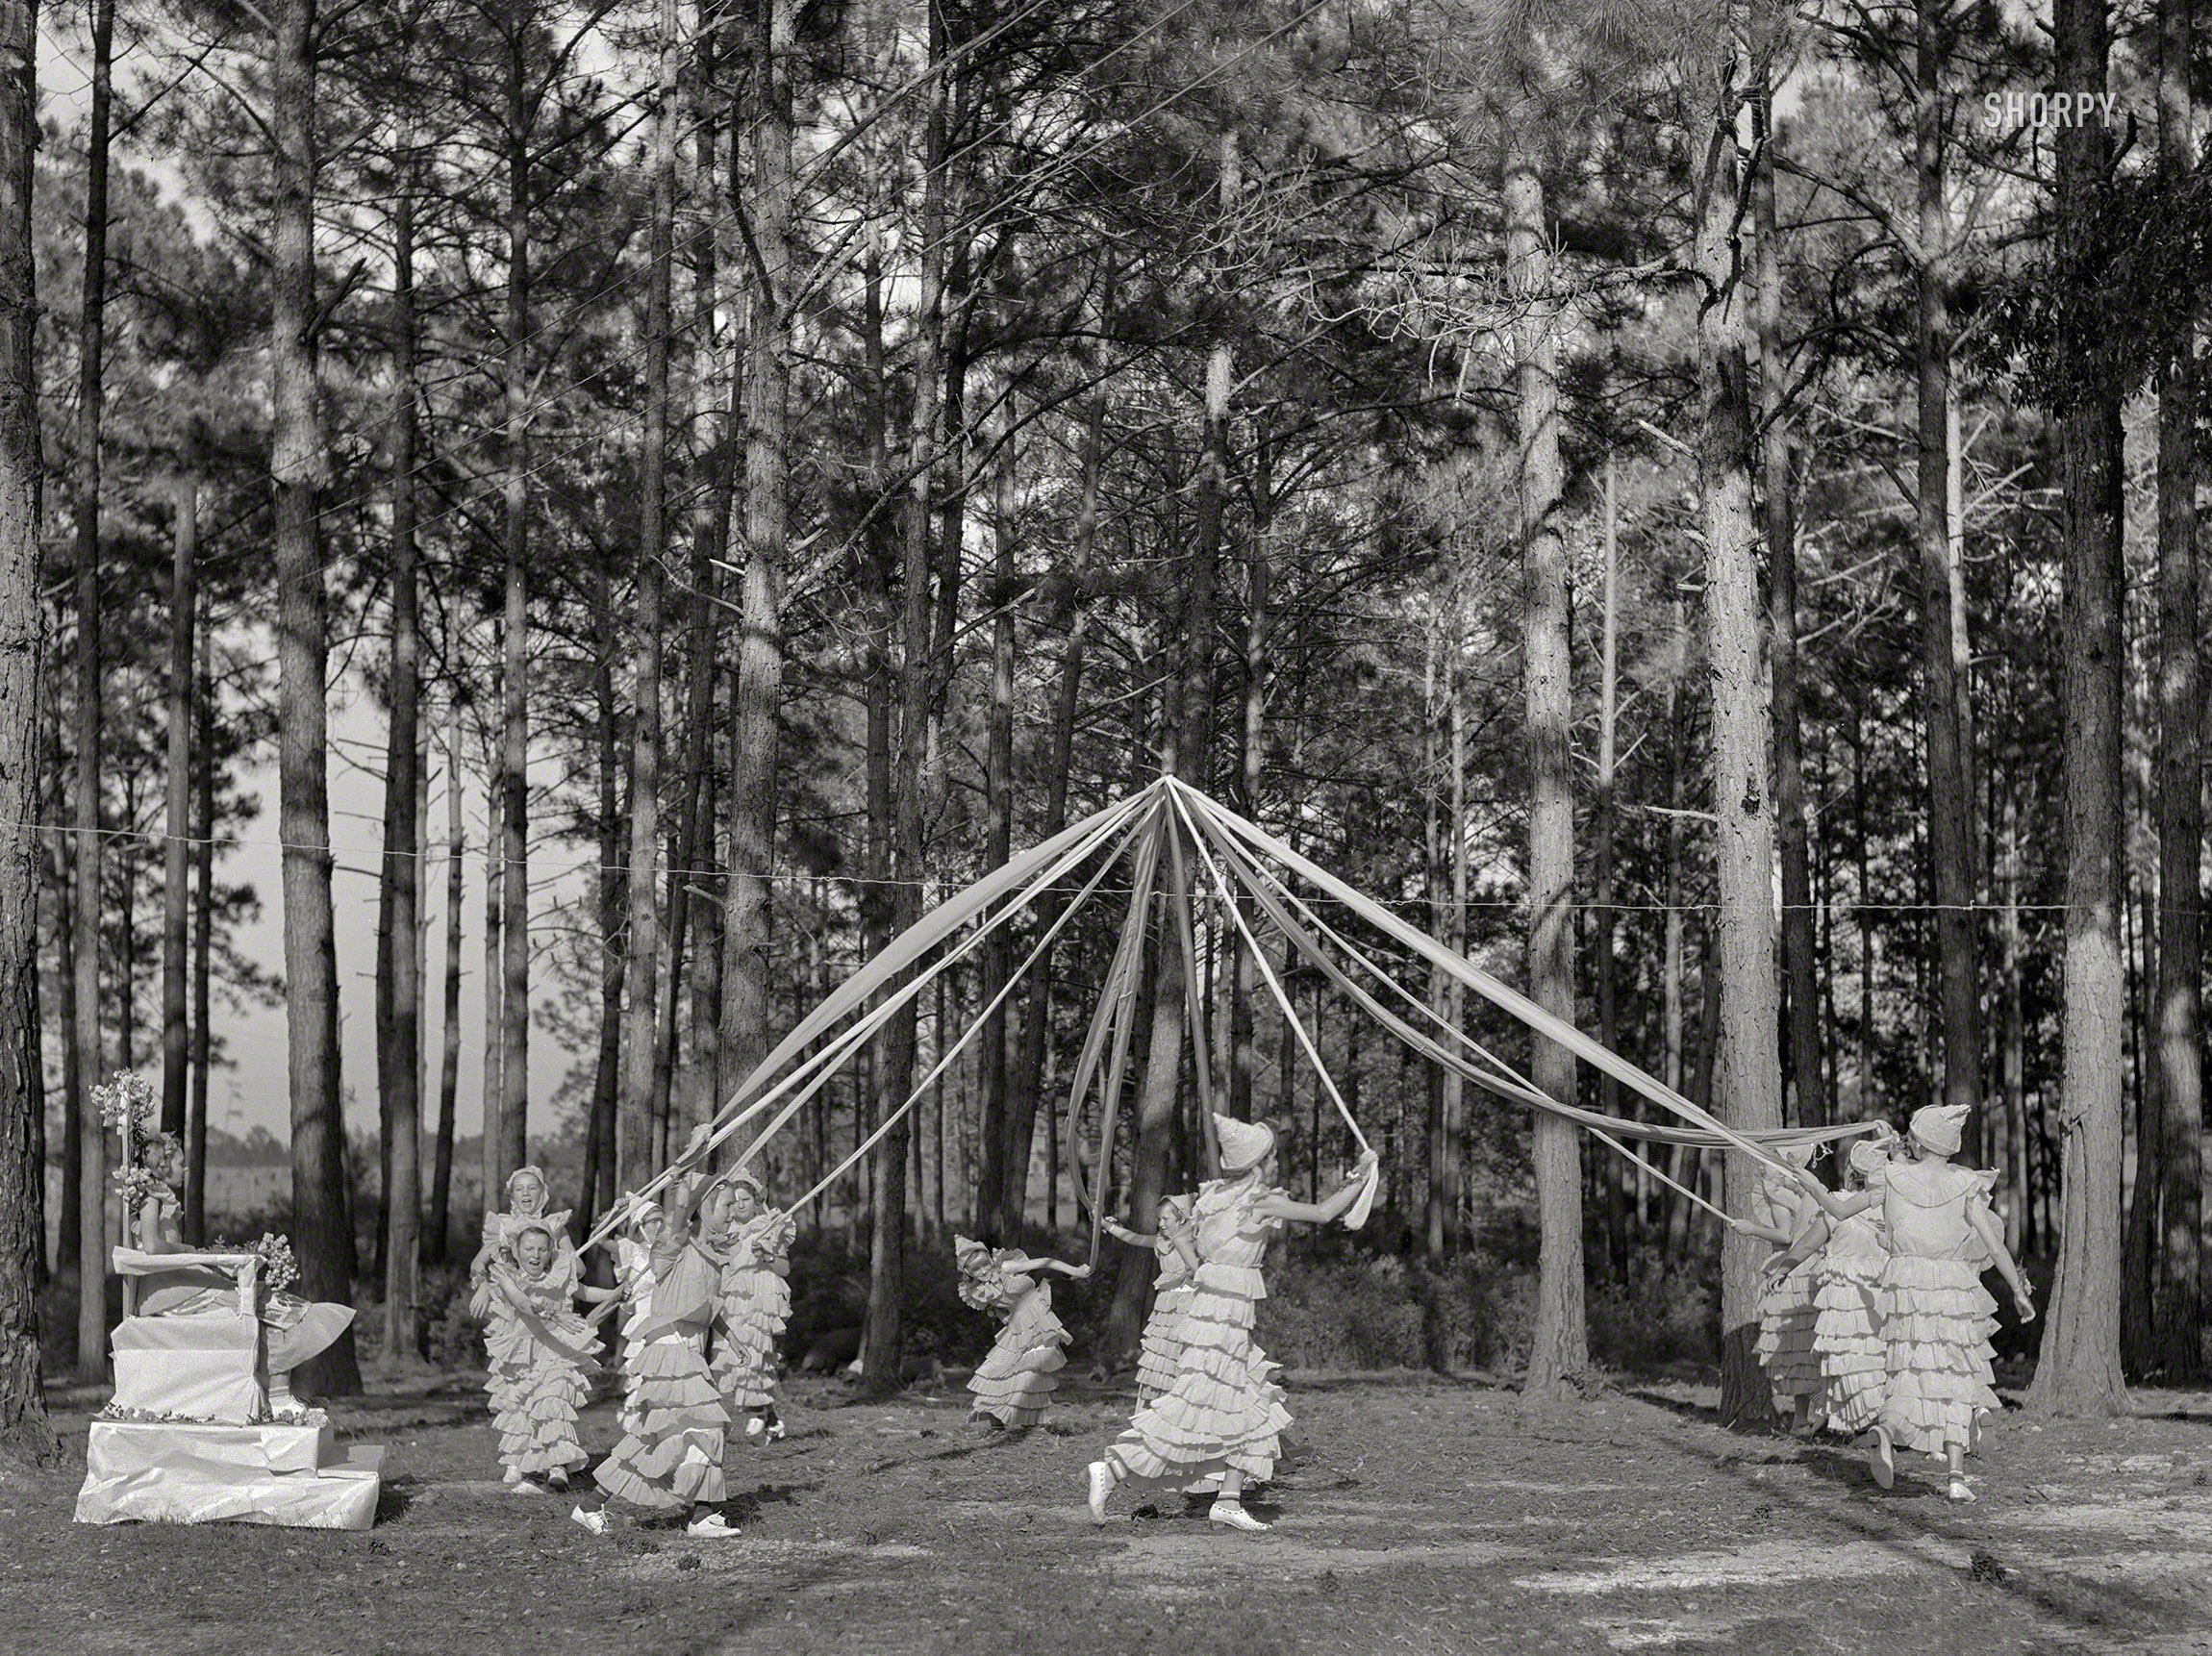 May 1939. "May Queen and maypole dance at May Day-Health Day festivities at Irwinville Farms, Georgia." Medium format negative by Marion Post Wolcott. View full size.